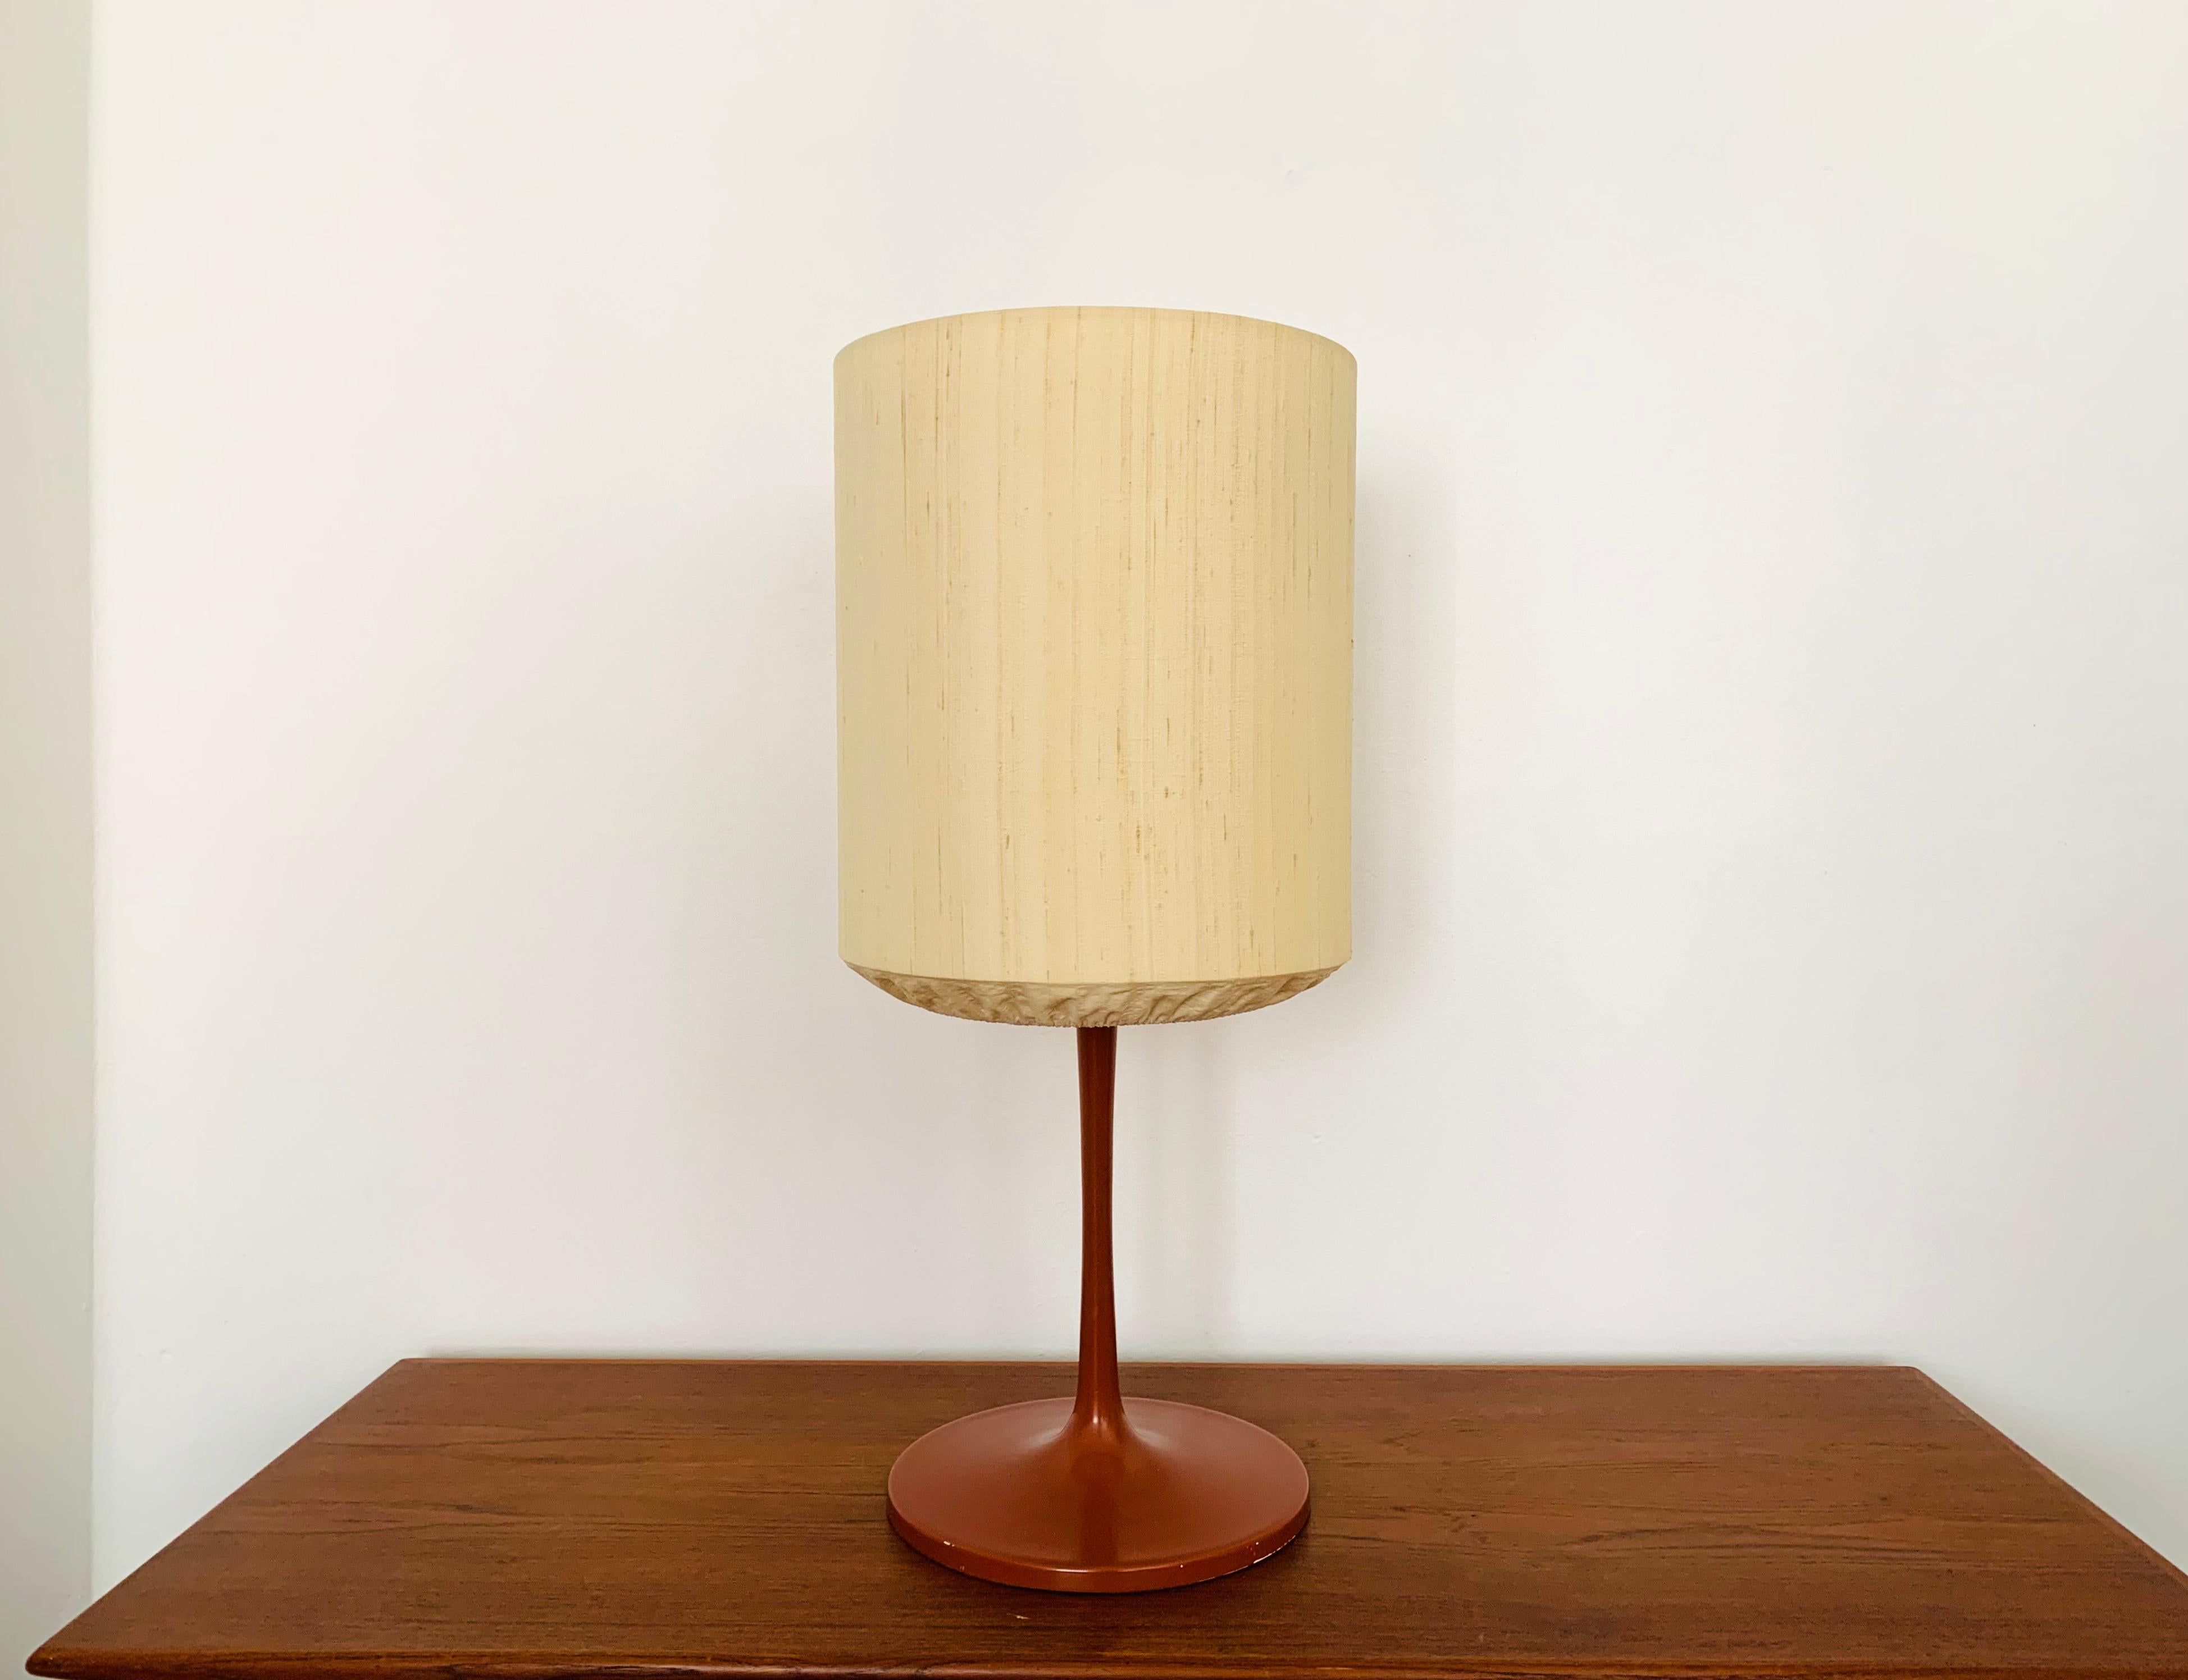 Large and beautiful table lamp from the 1970s.
Impressive design and very high-quality workmanship.
The lighting effect of the lamp is extremely beautiful.

Manufacturer: Staff
Around 1970

Condition:

Very good vintage condition with slight signs